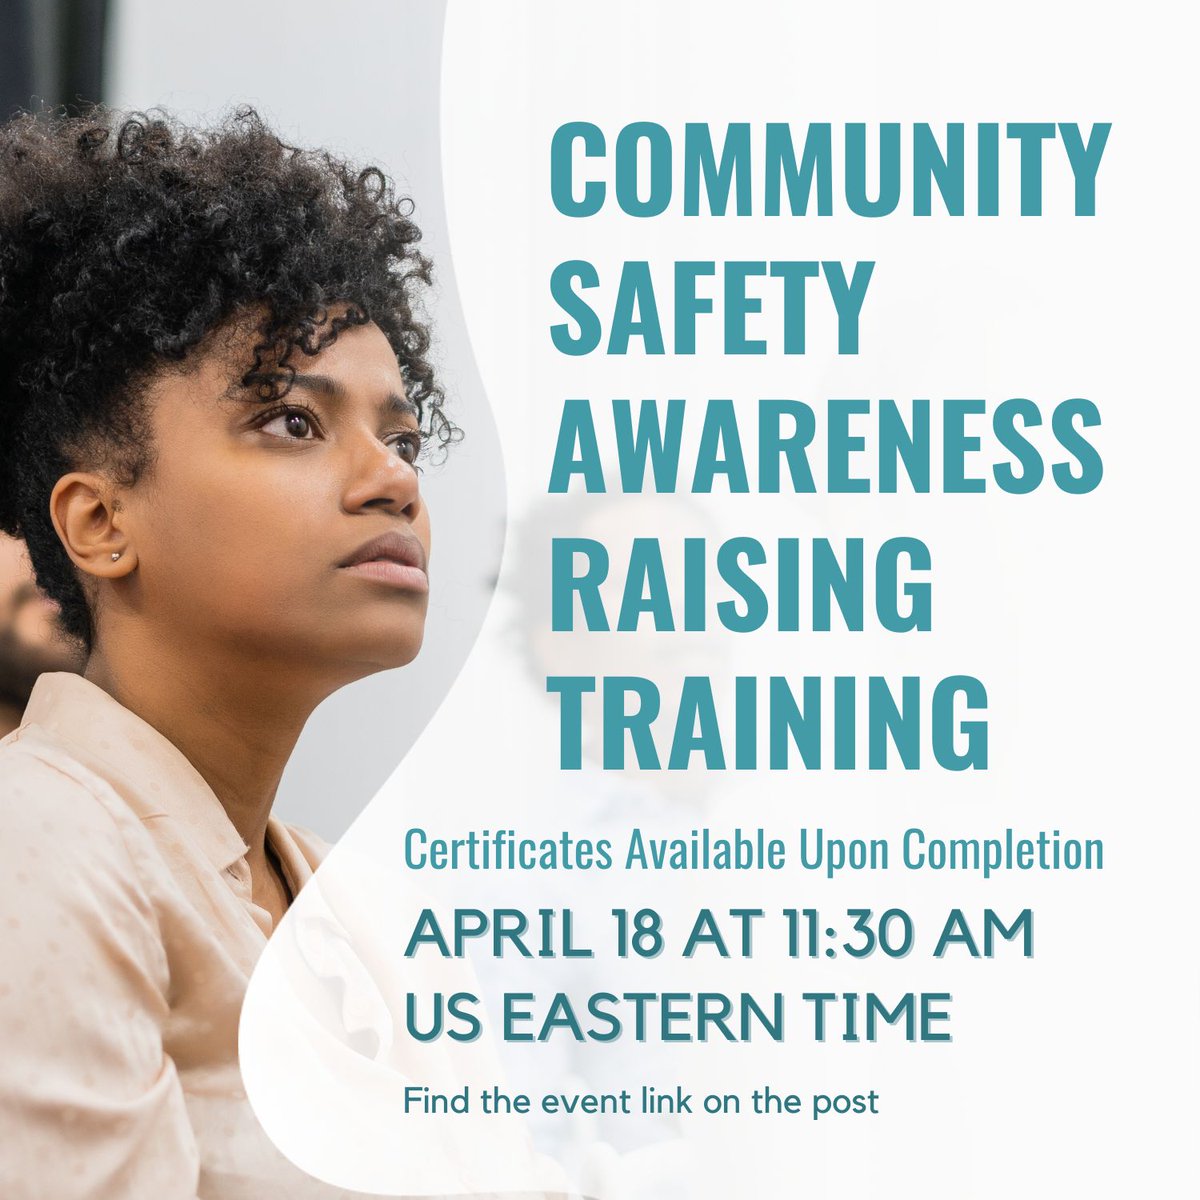 Join us for an upcoming virtual training on community safety awareness on April 18th at 11:30 am EST. Register today: bit.ly/4cV2GbN 

#CommunitySafety #AwarenessTraining #SaferCommunity #SaferYouth